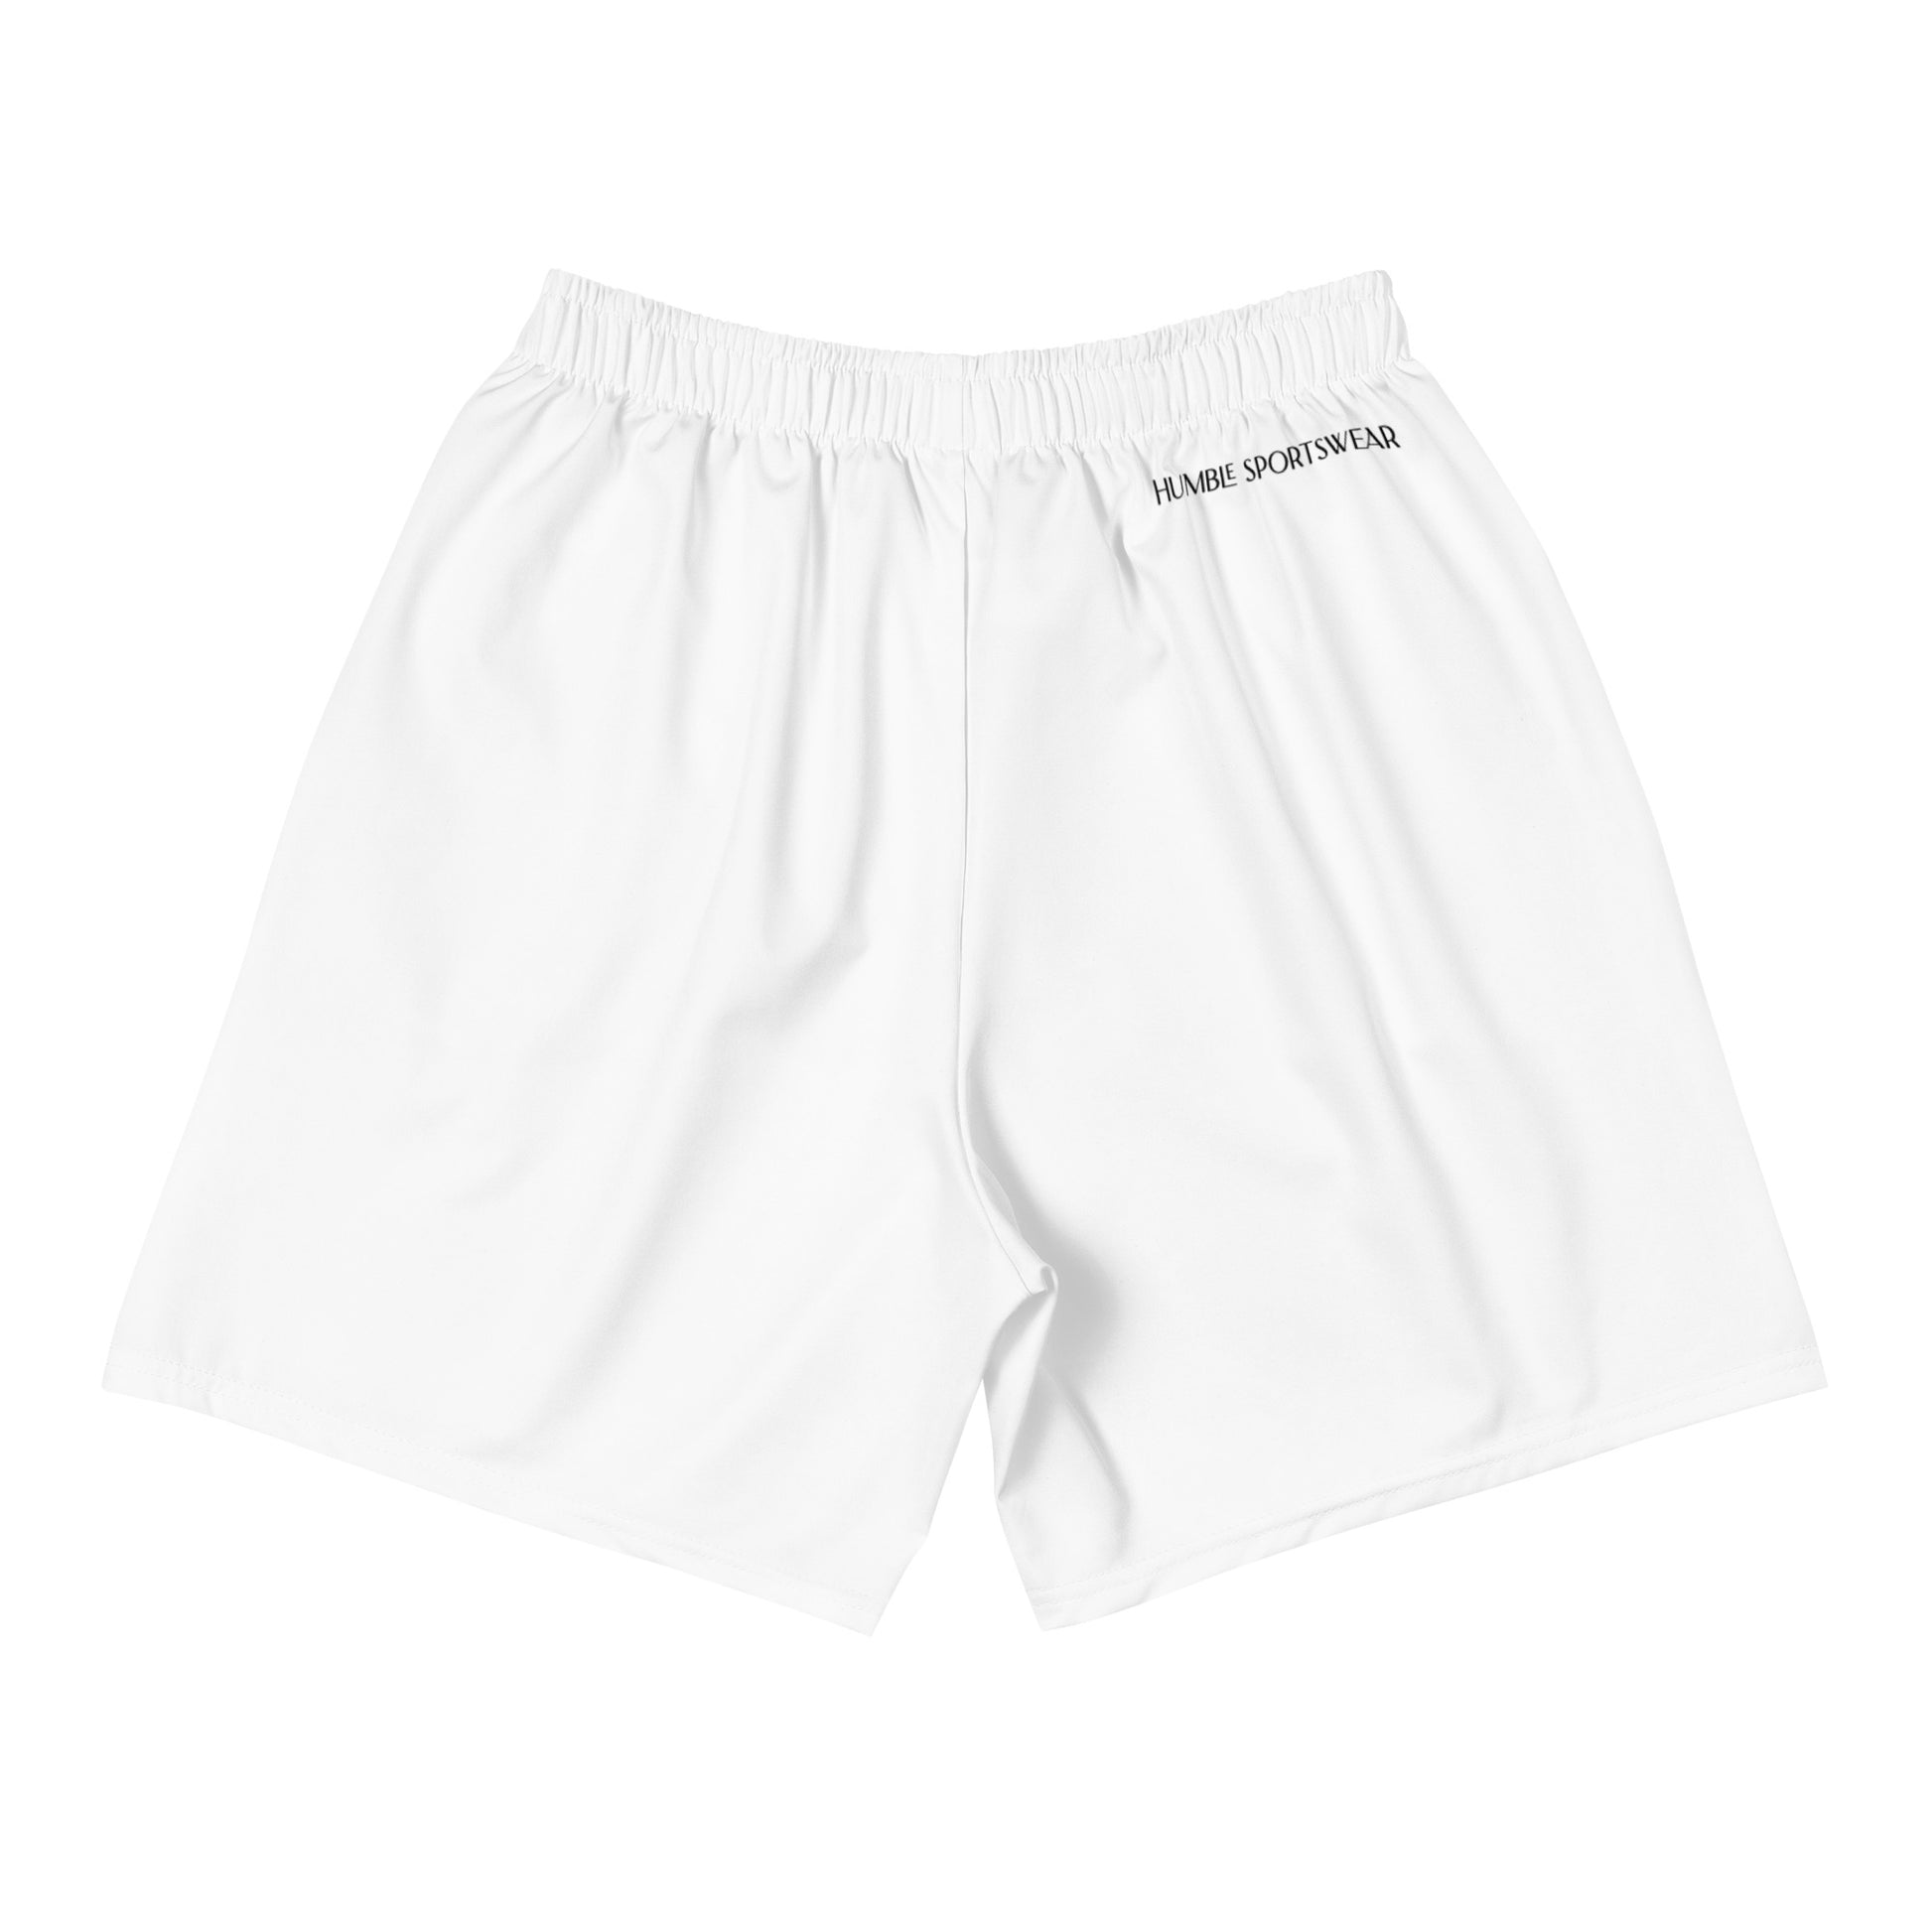 Humble Sportswear, men's color match eco friendly recycled activewear shorts 